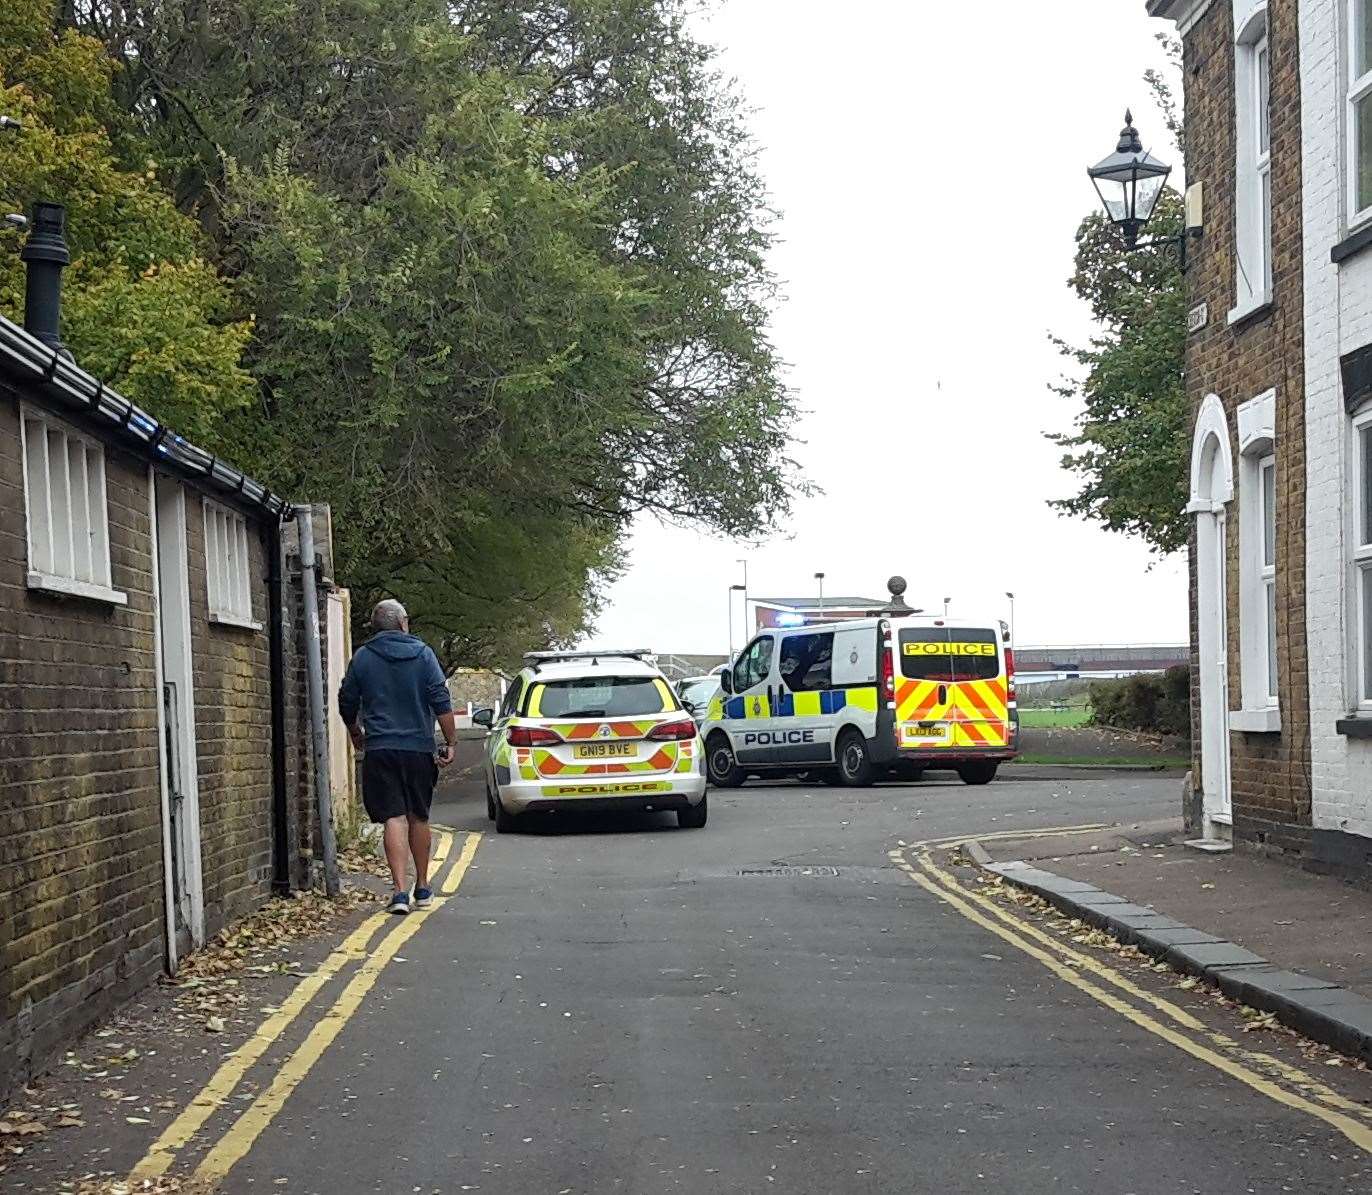 The British Transport Police and Kent Police were sent to the residential road off Sheerness High Street